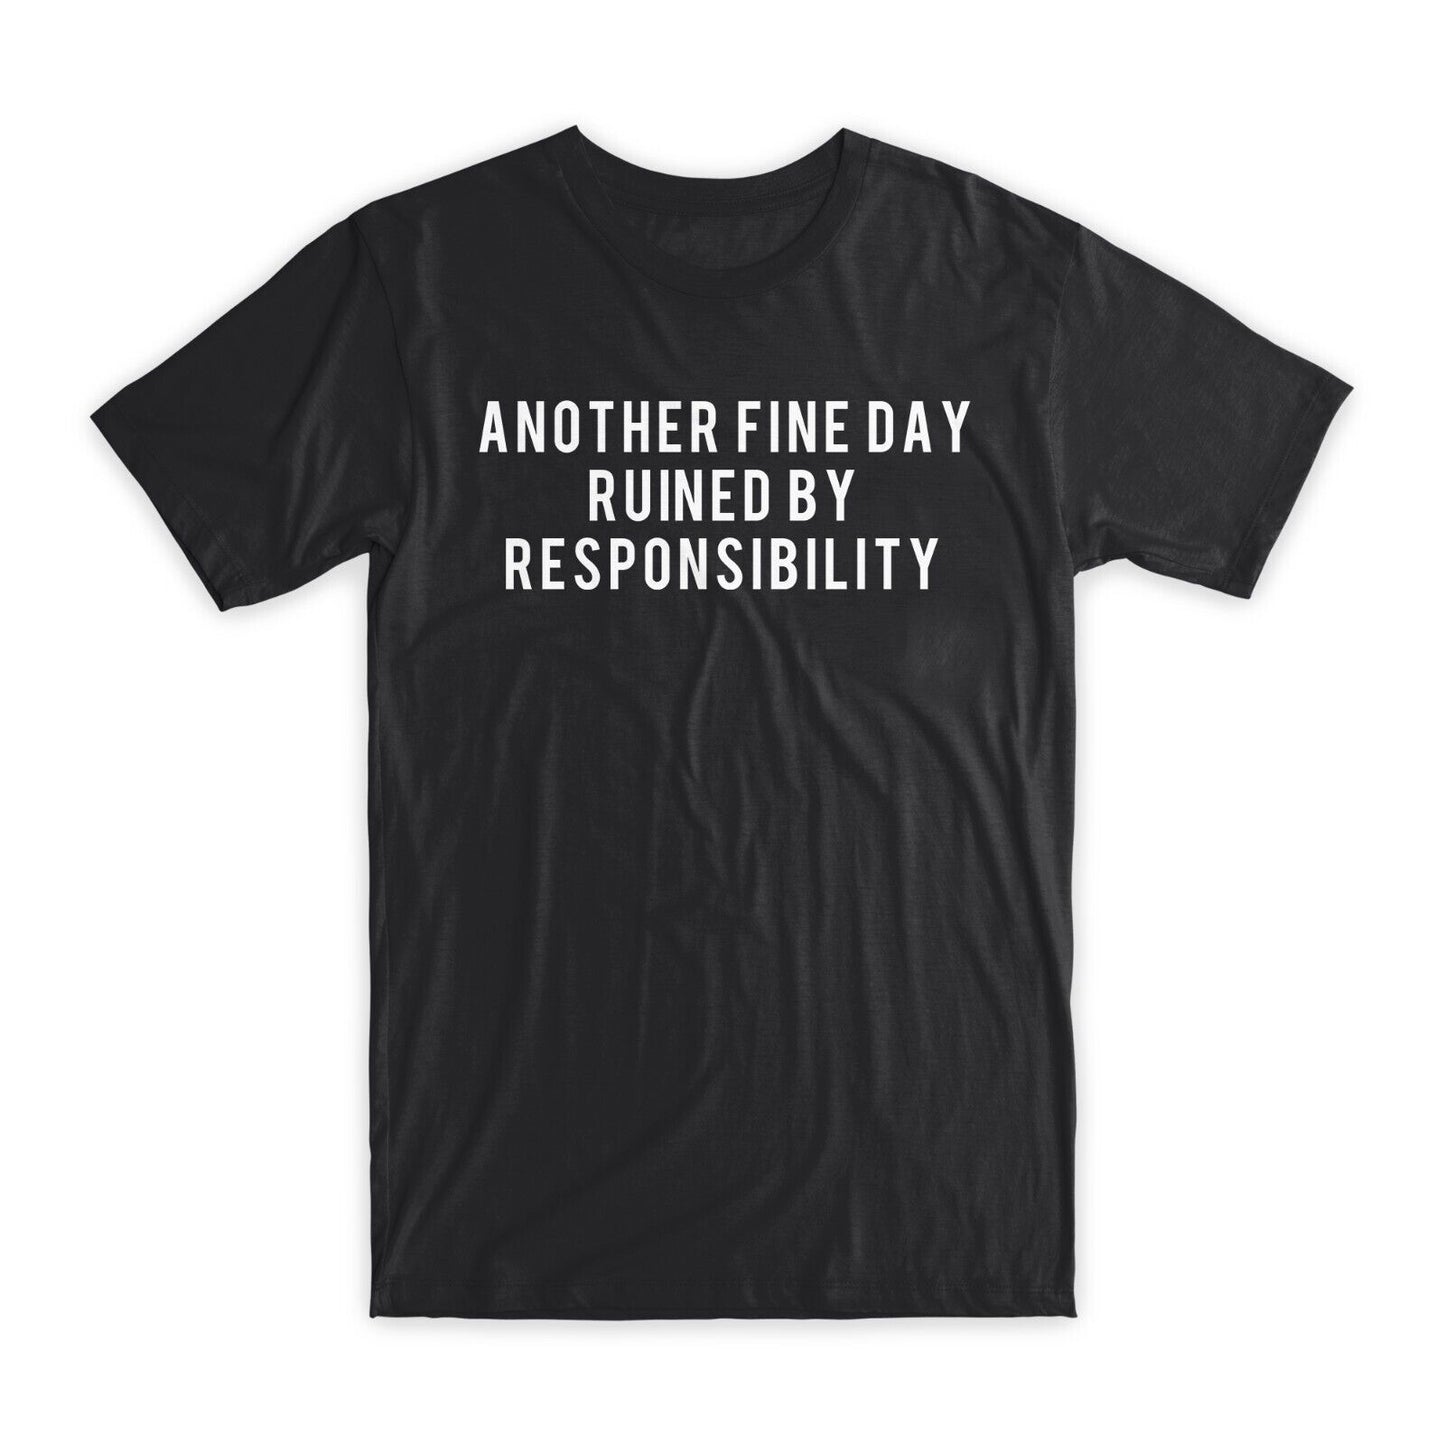 Another Fine Day Ruined By Responsibility T-Shirt Premium Cotton Funny Tees NEW